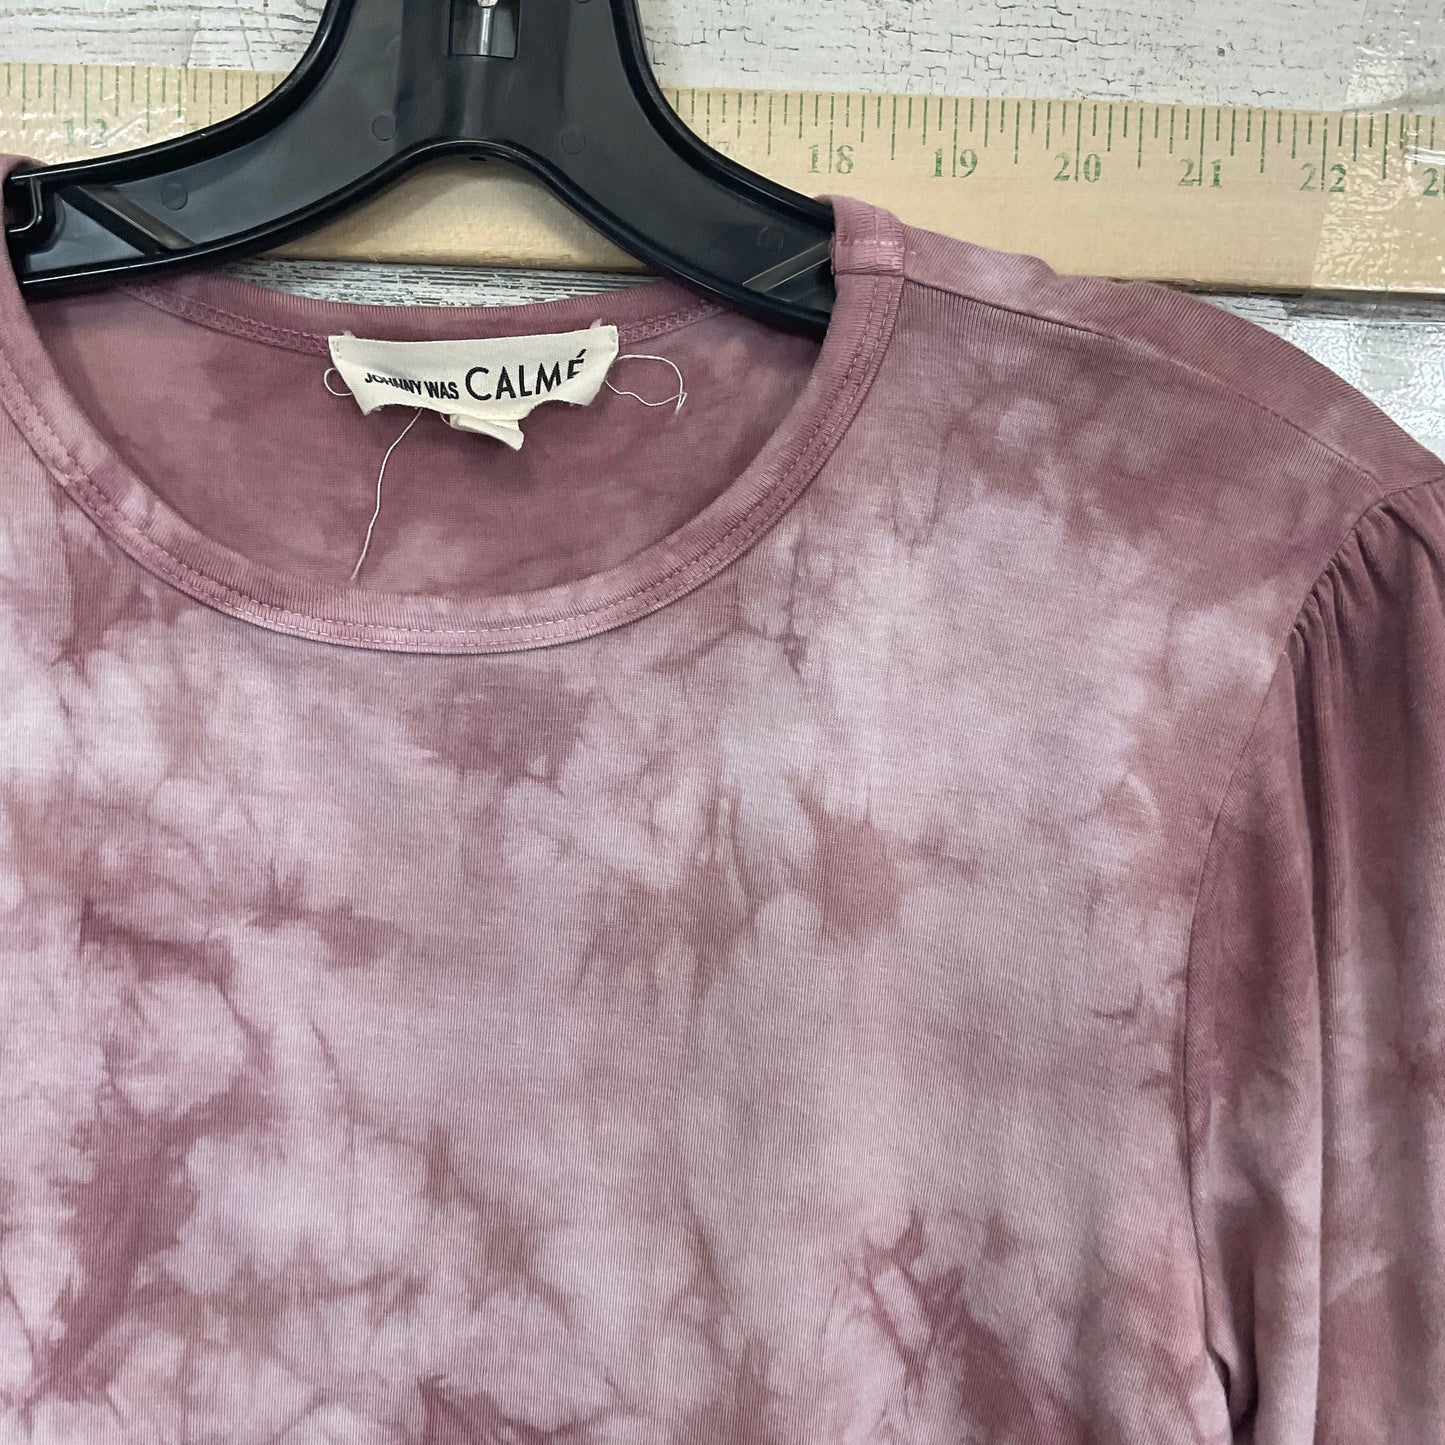 Mauve Top Long Sleeve Johnny Was, Size Xs